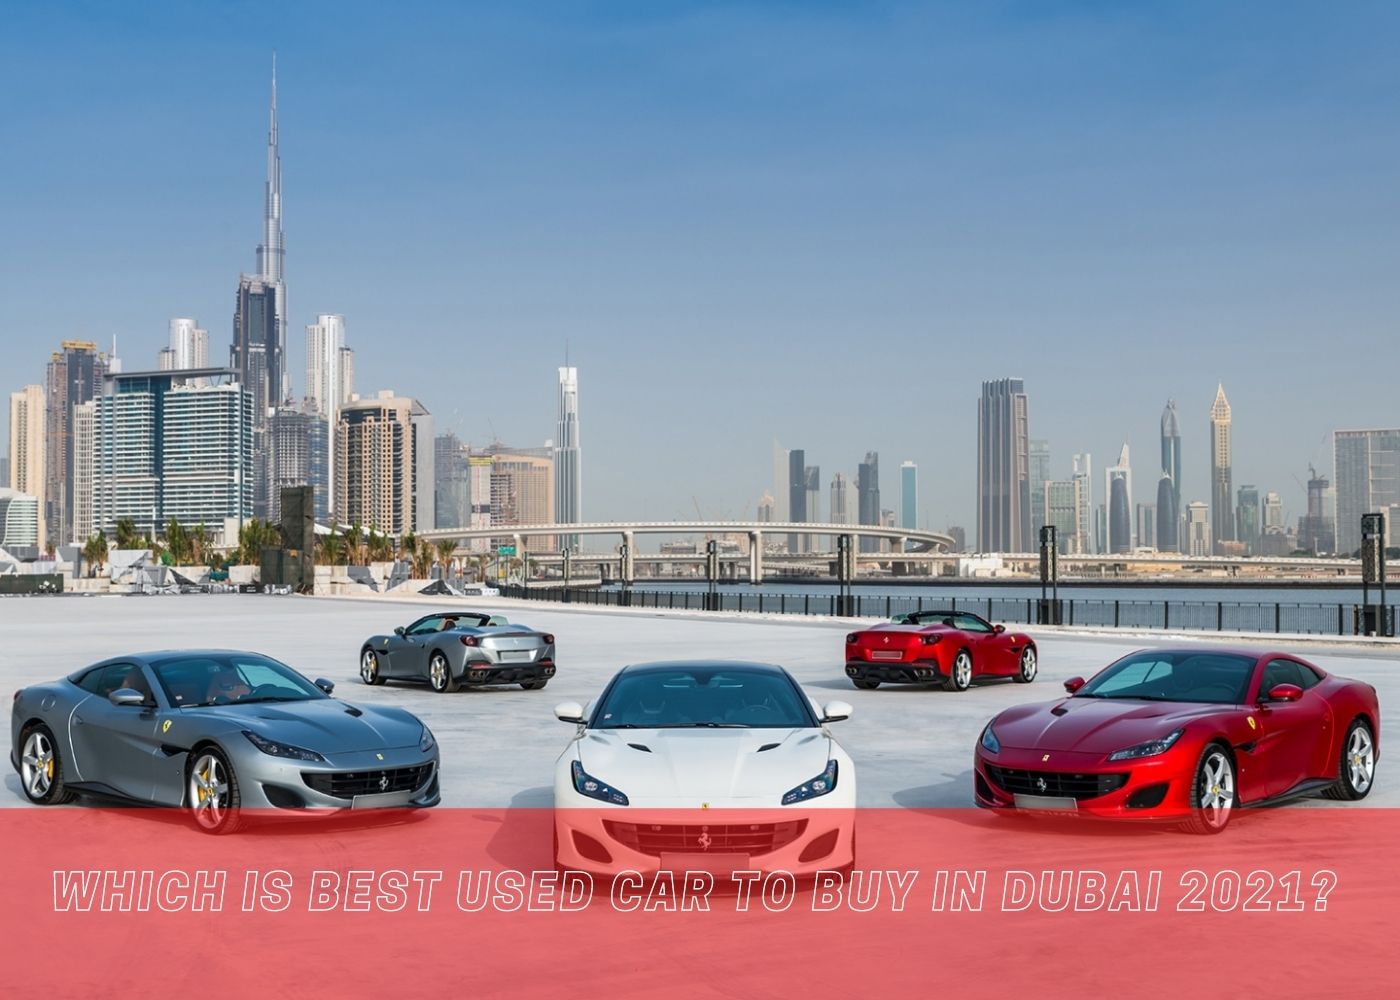 Which is best used car to buy in Dubai 2021? 